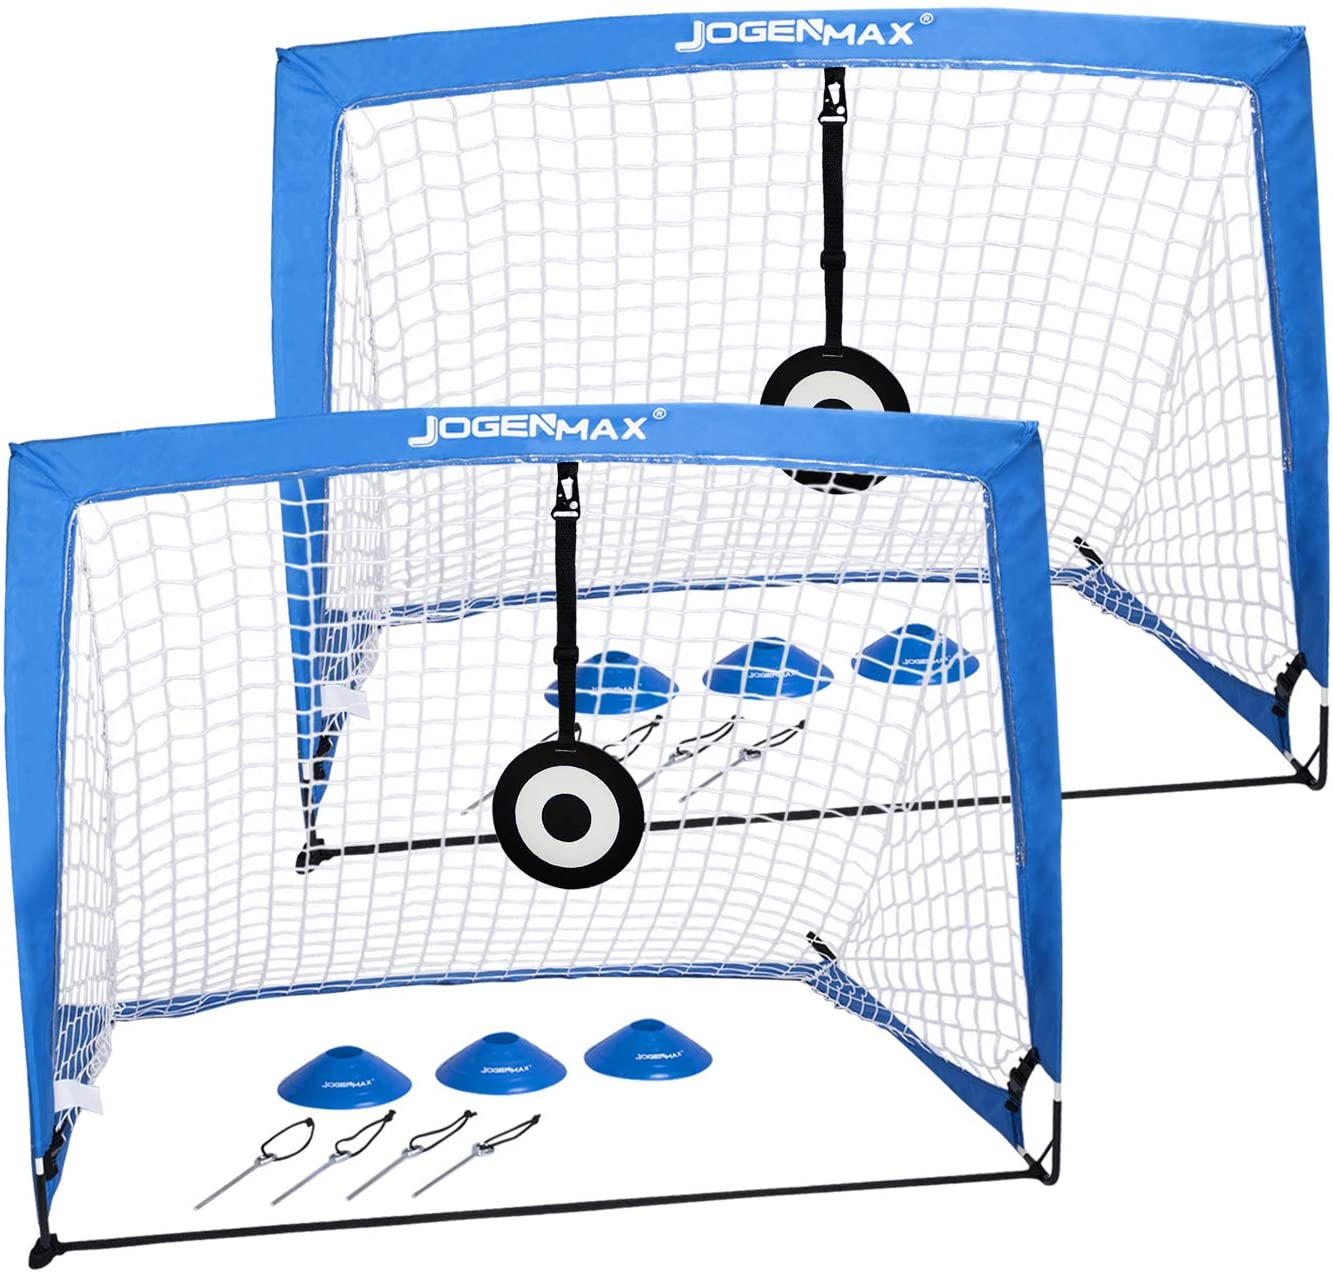 JOGENMAX Portable Soccer Goal, Pop Up Goal Nets with Aim Target